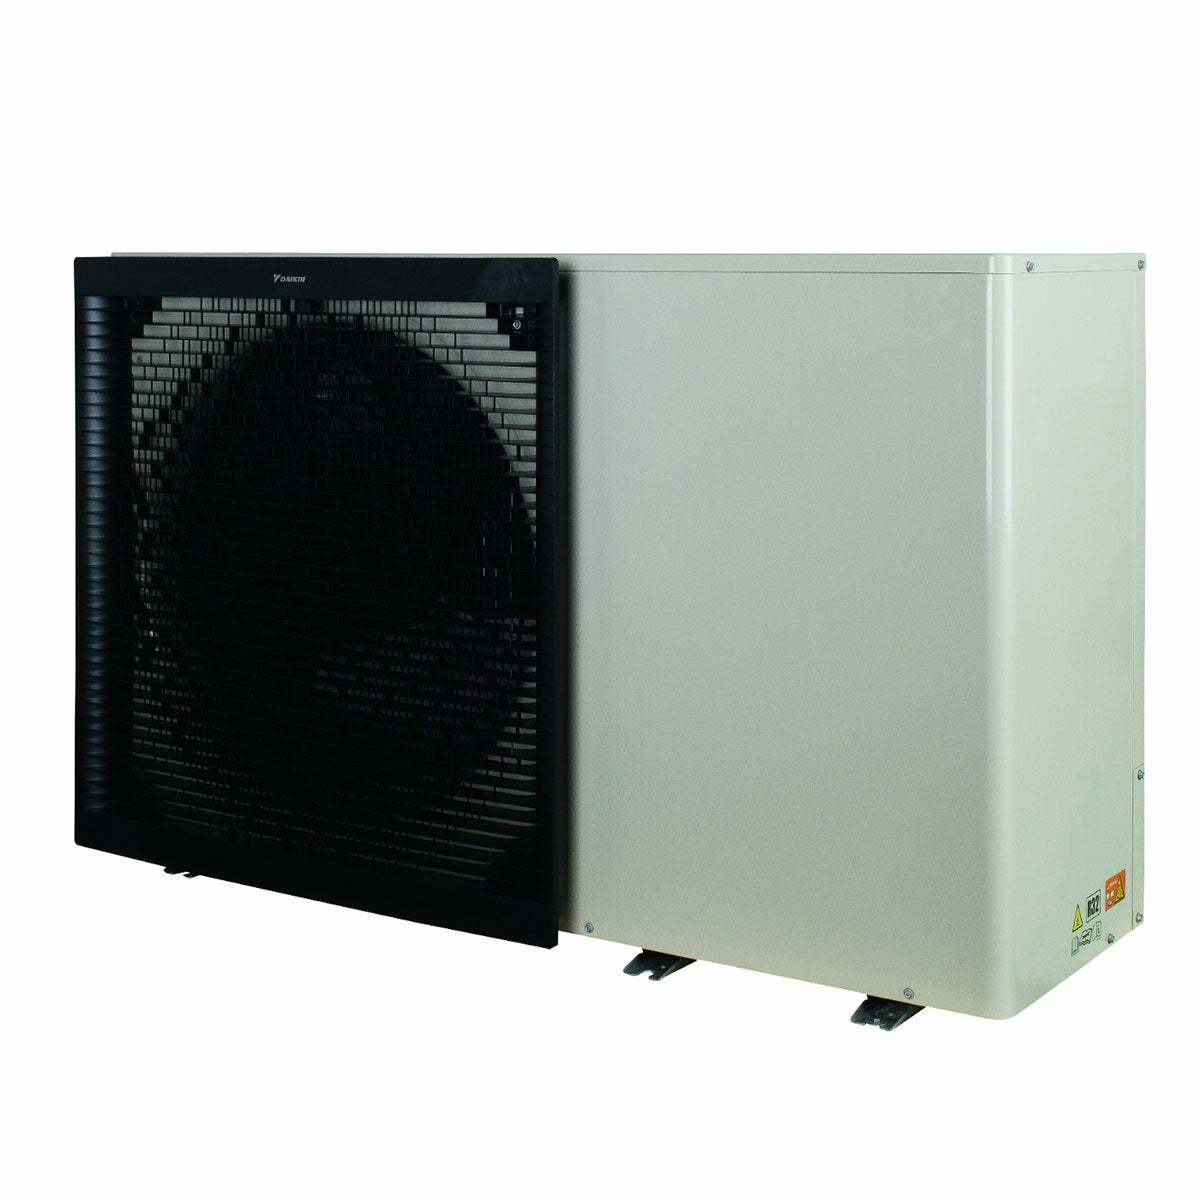 Daikin air/water heat pump 12 kW single-phase power supply with R32 A++ gas hydronic module